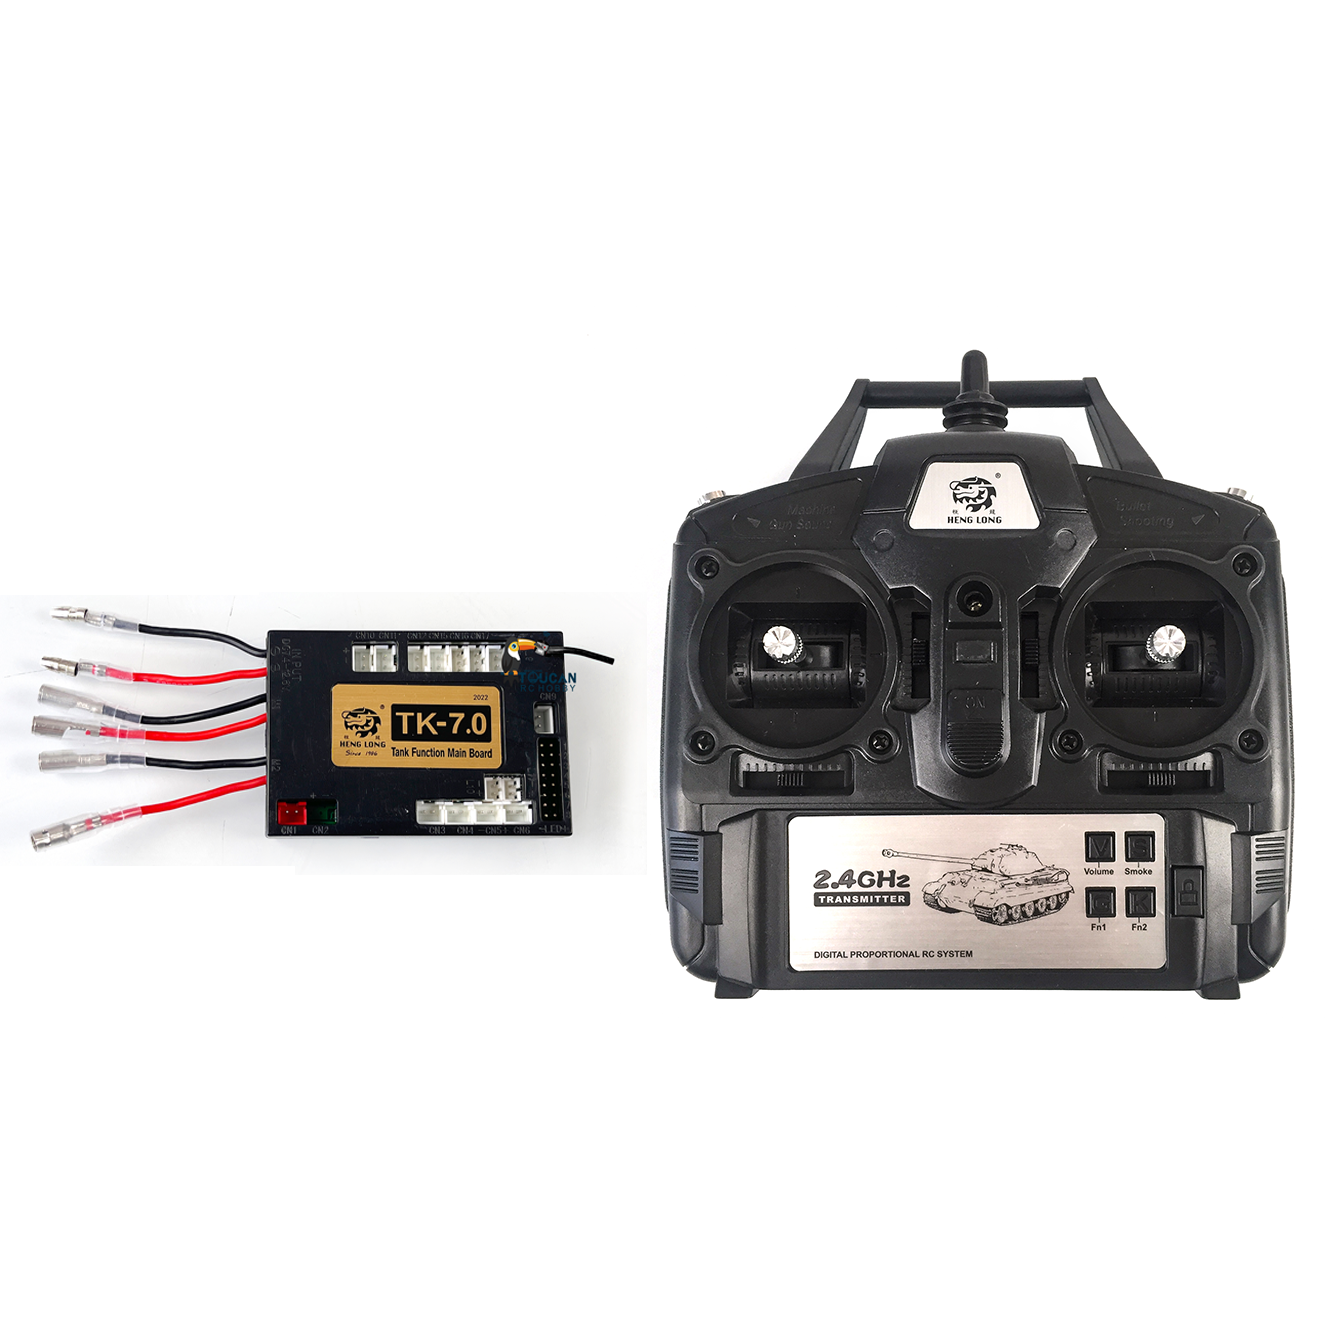 1/16 Scale RC Henglong Tank 2.4Ghz 7.0 Generation Radio System Transmitter Multi-Function Main Board Leopard 2A6 M1A2 Sound